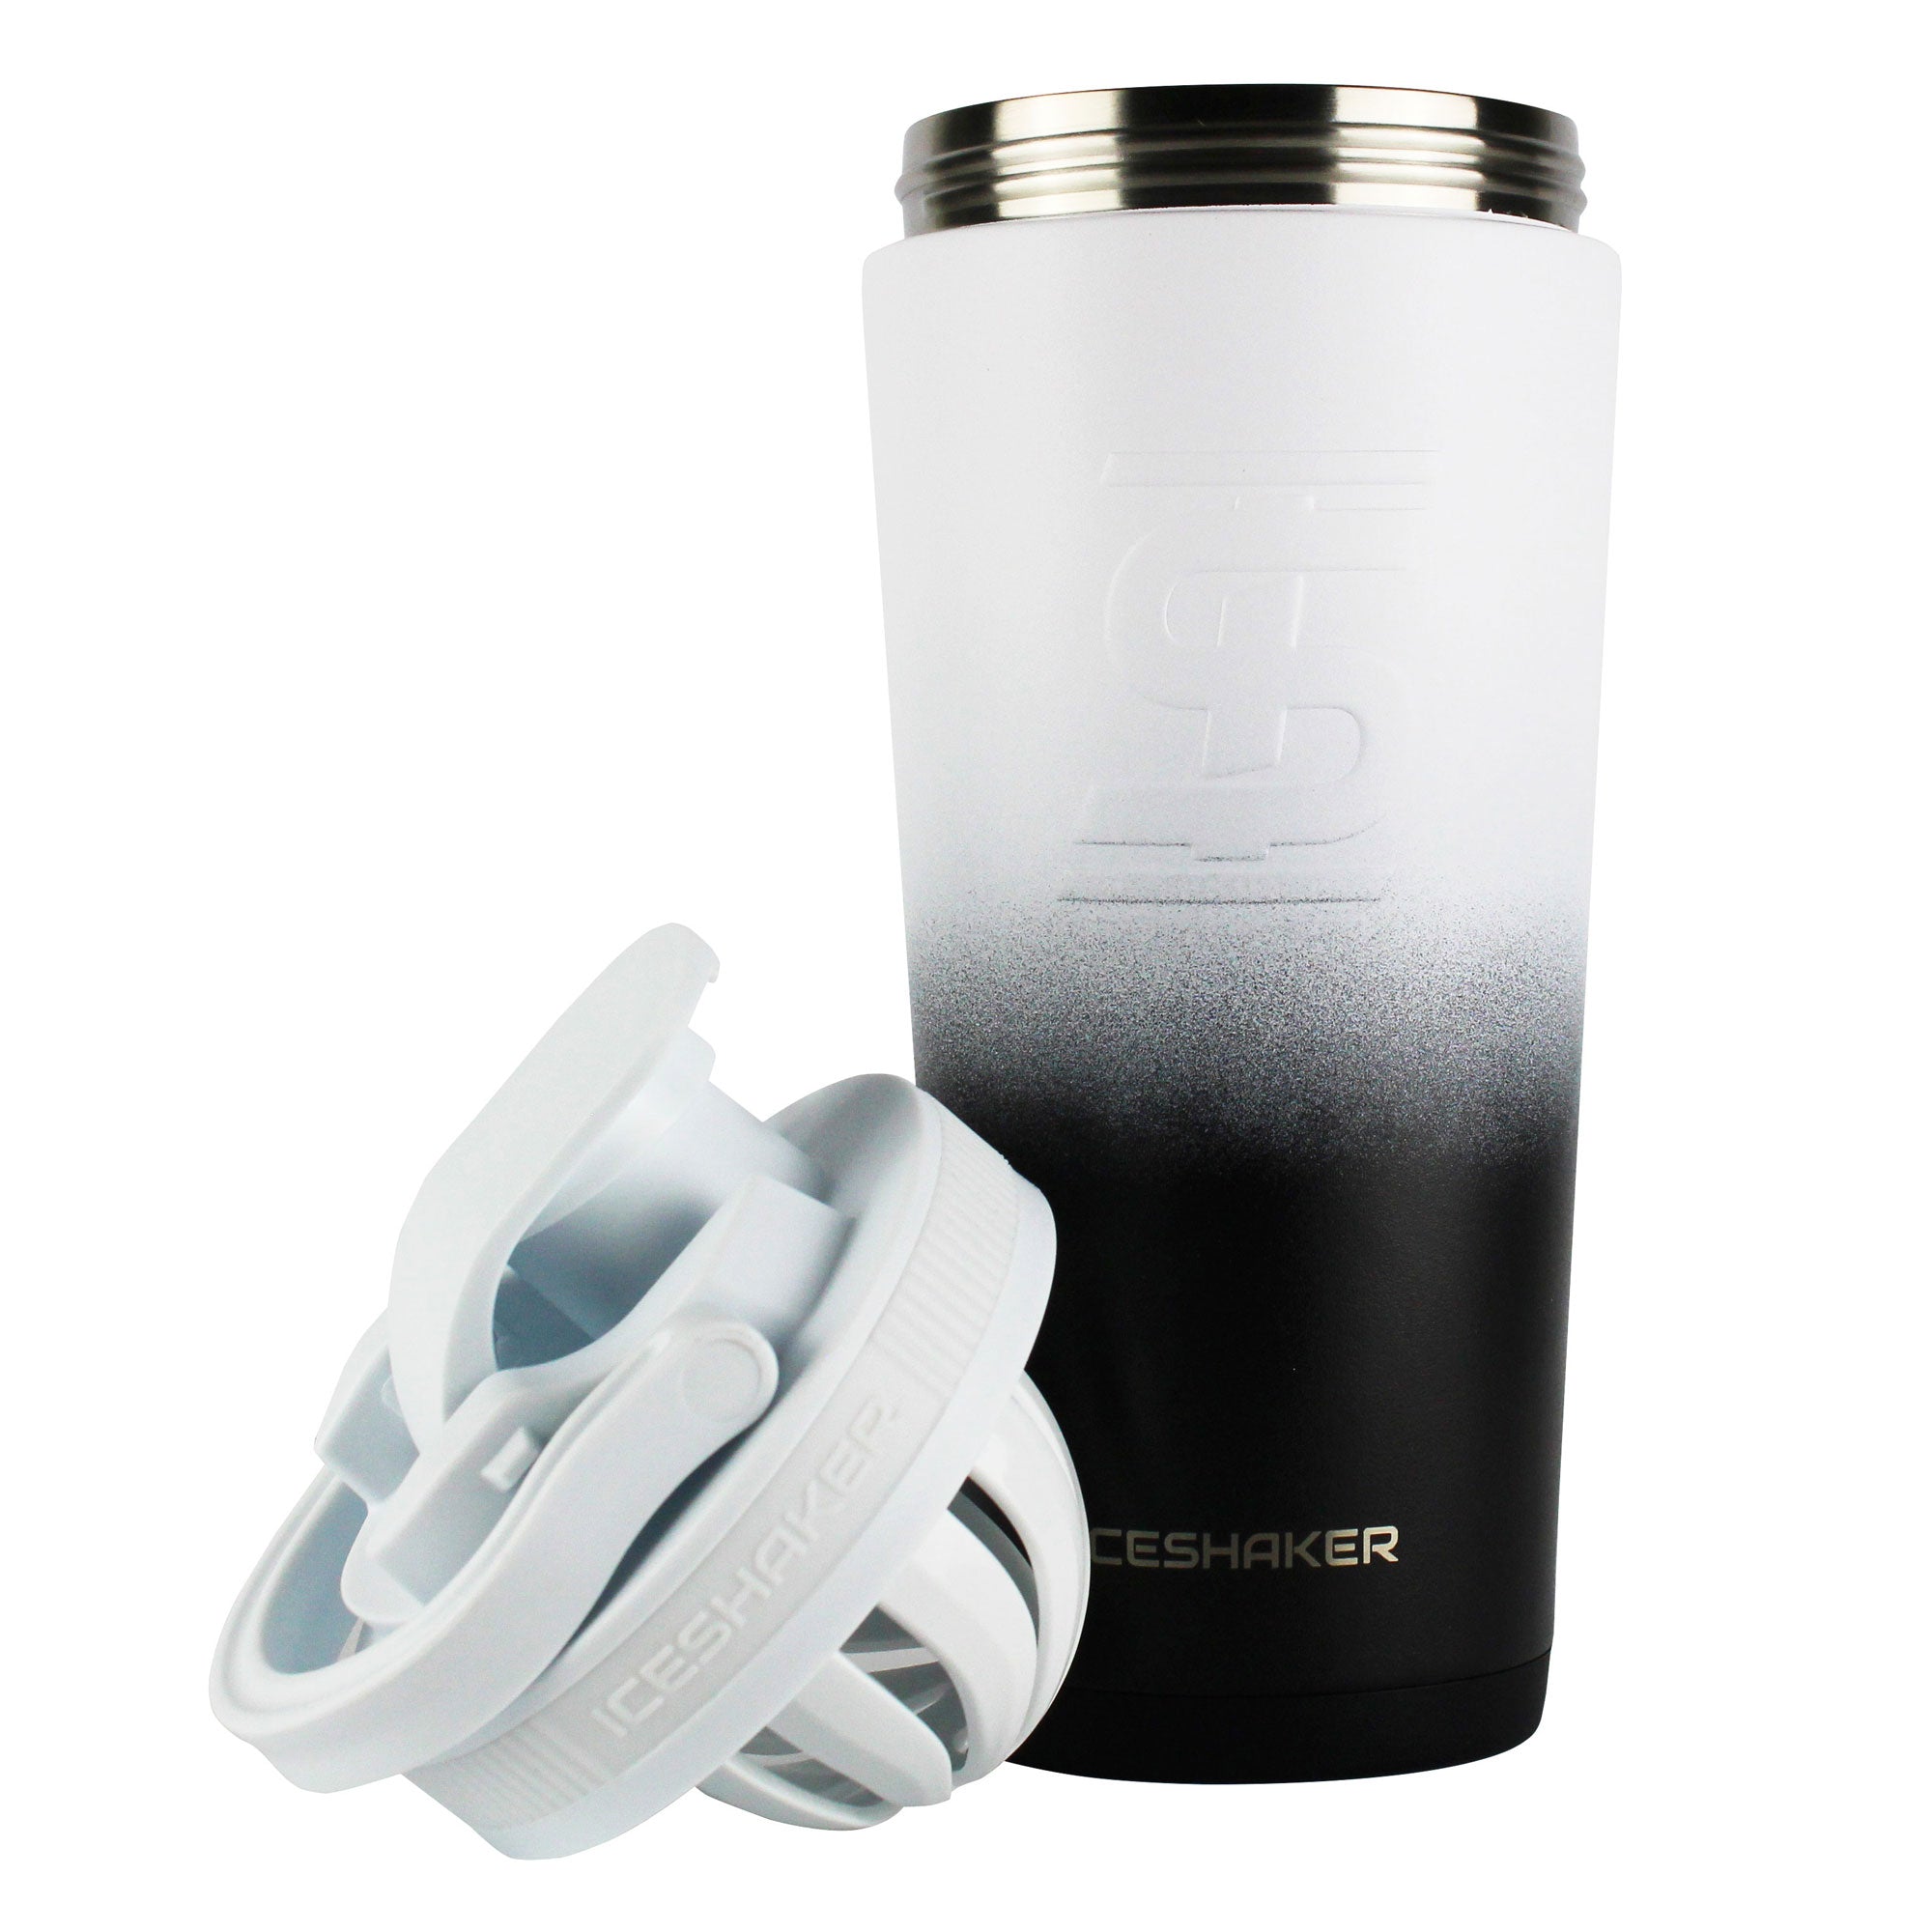 26 oz Stainless Steel Ice Shaker Bottle - Engraved, DW-21001E - MARCO Promos